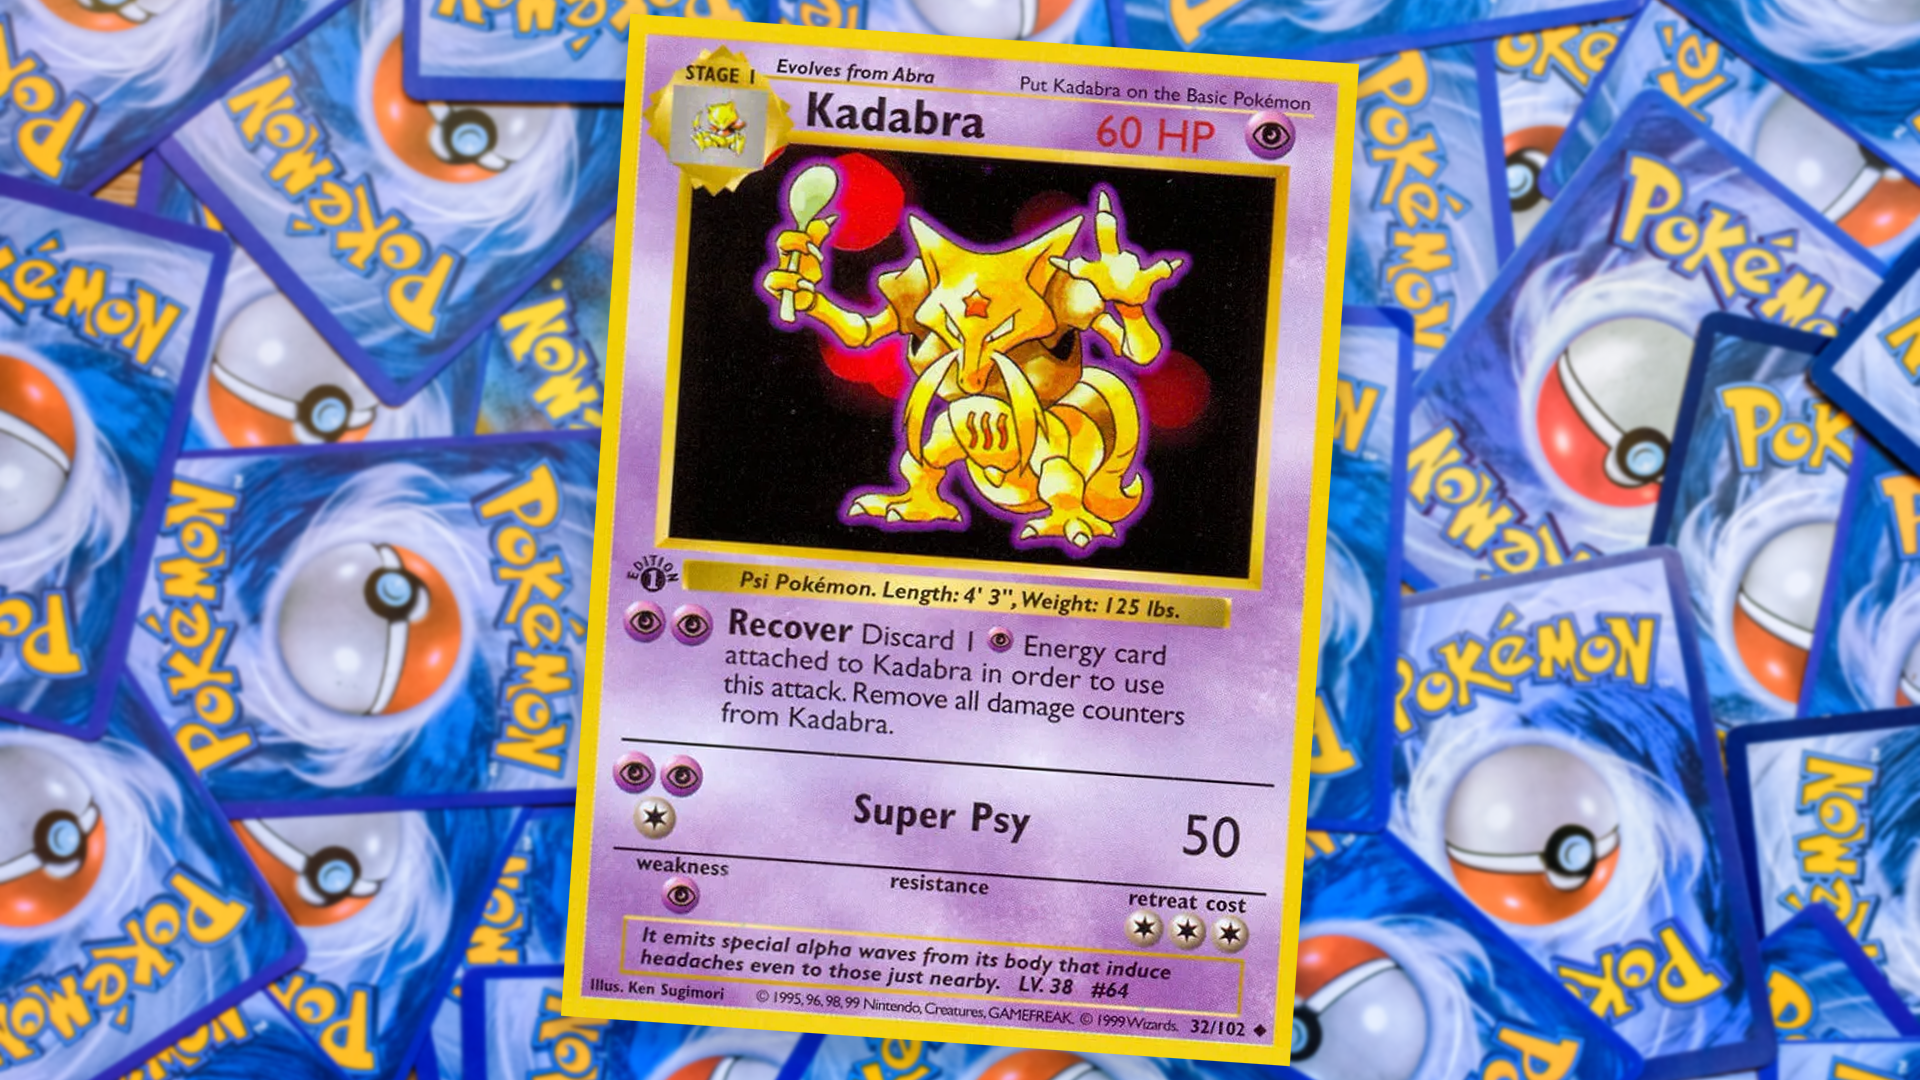 Image for It looks like Kadabra is returning to the Pokémon card game after 20 years in legal exile